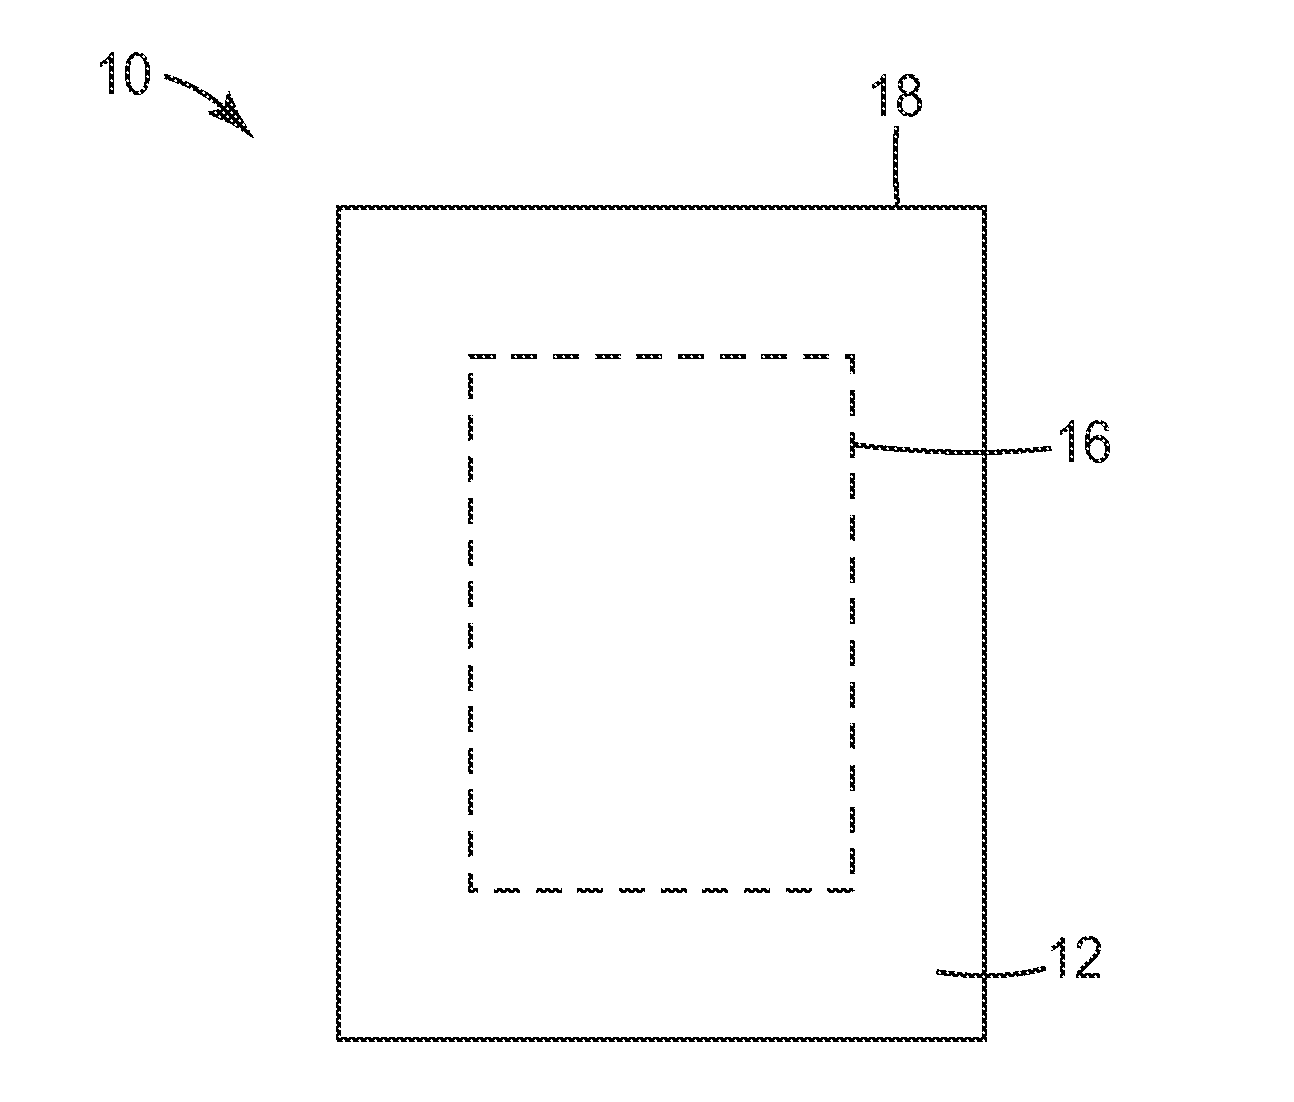 Medical articles and methods of making using immiscible material